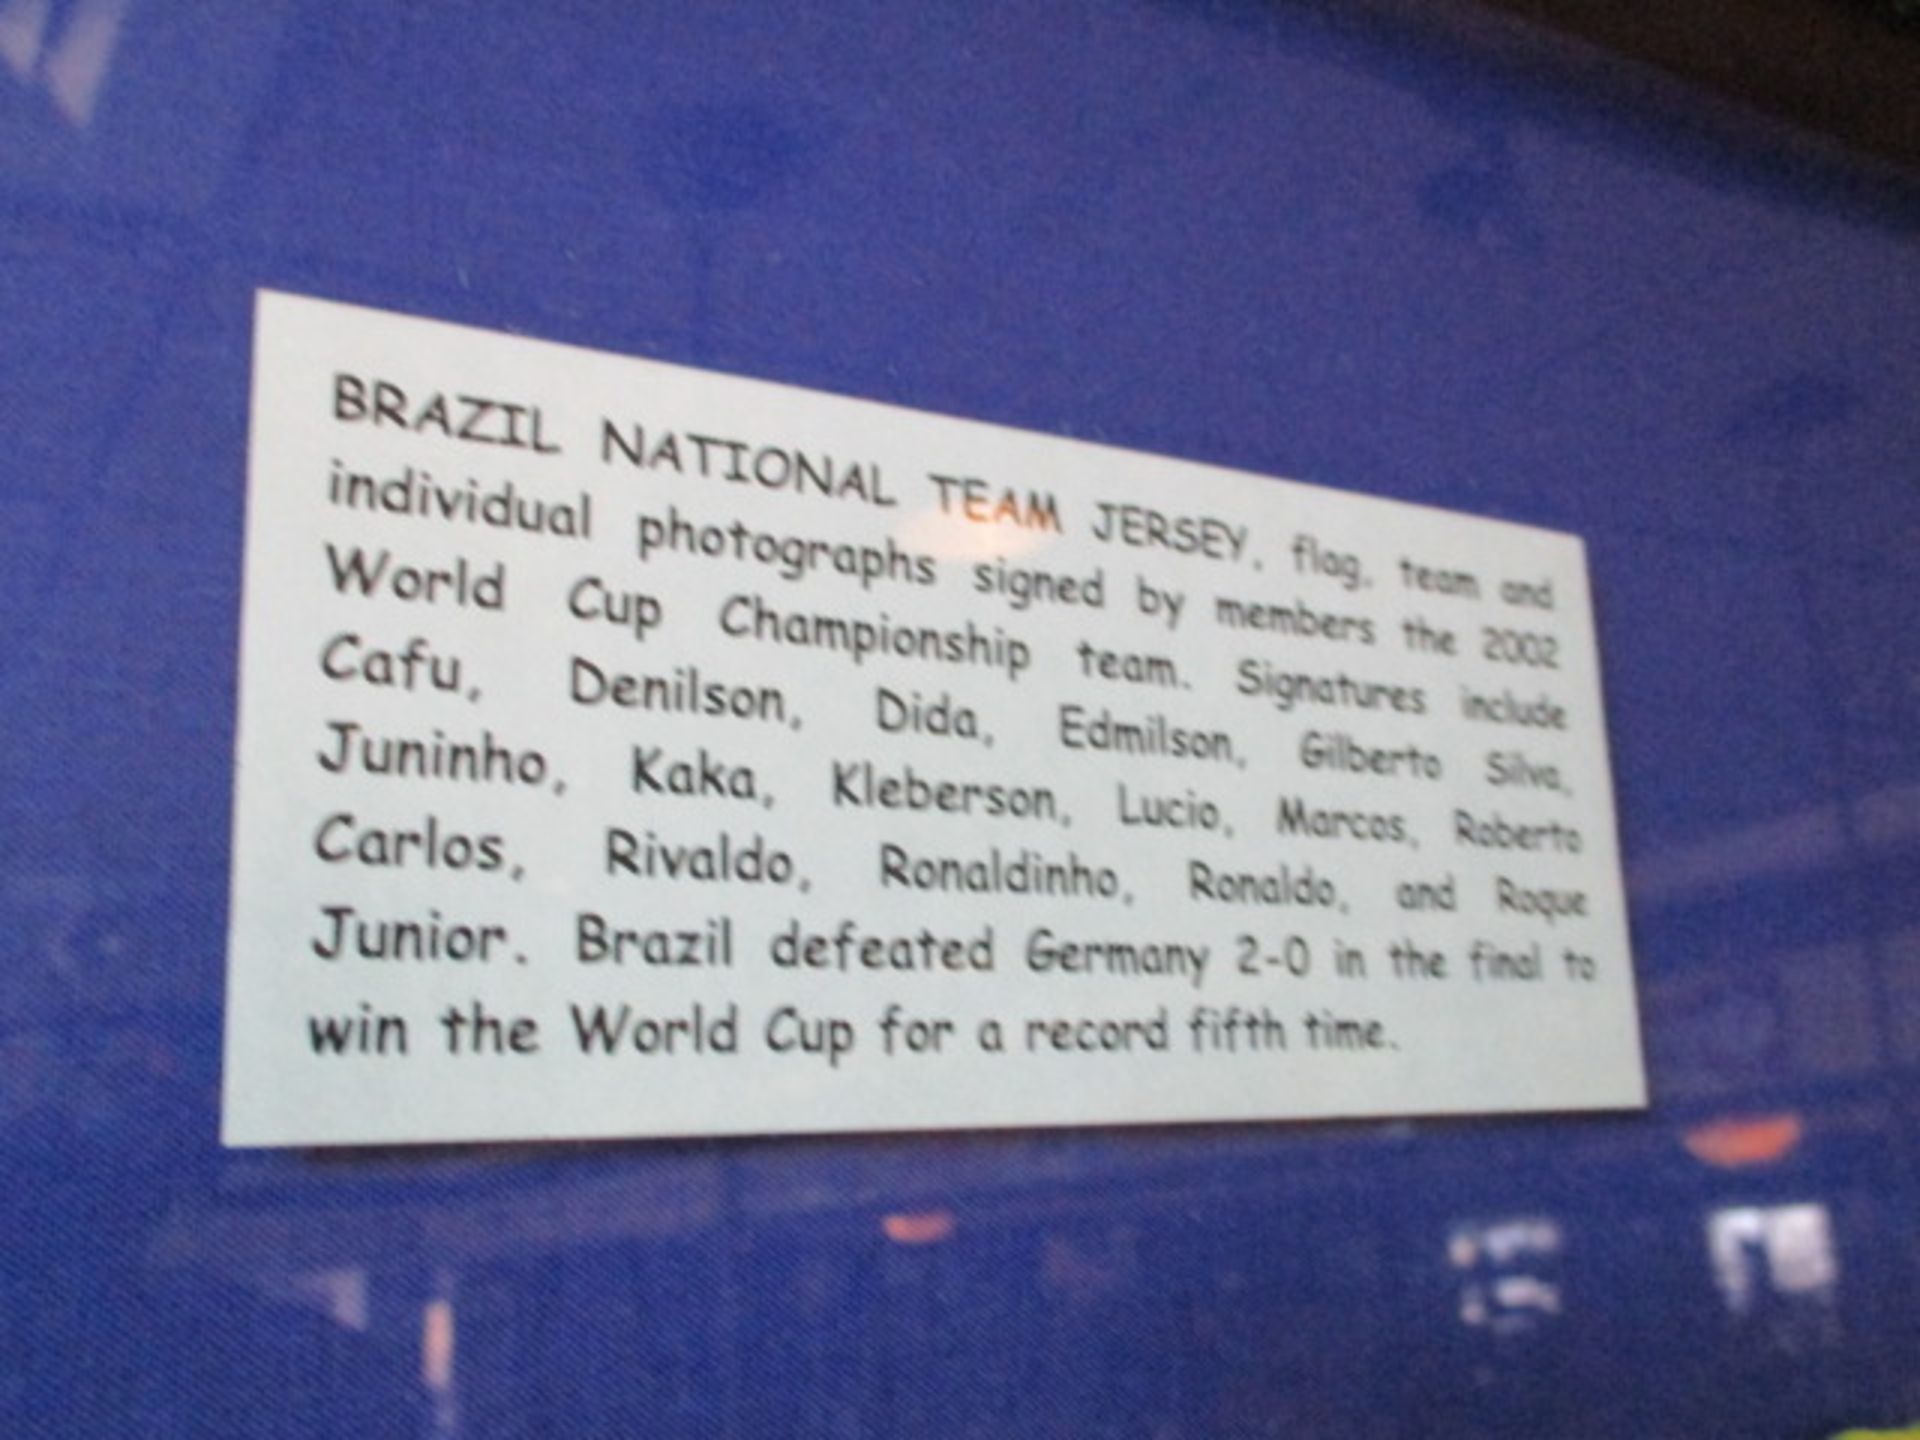 Brazil National team shirt, flag, team and individual photos signed by members of the 2002 World Cup - Image 3 of 8